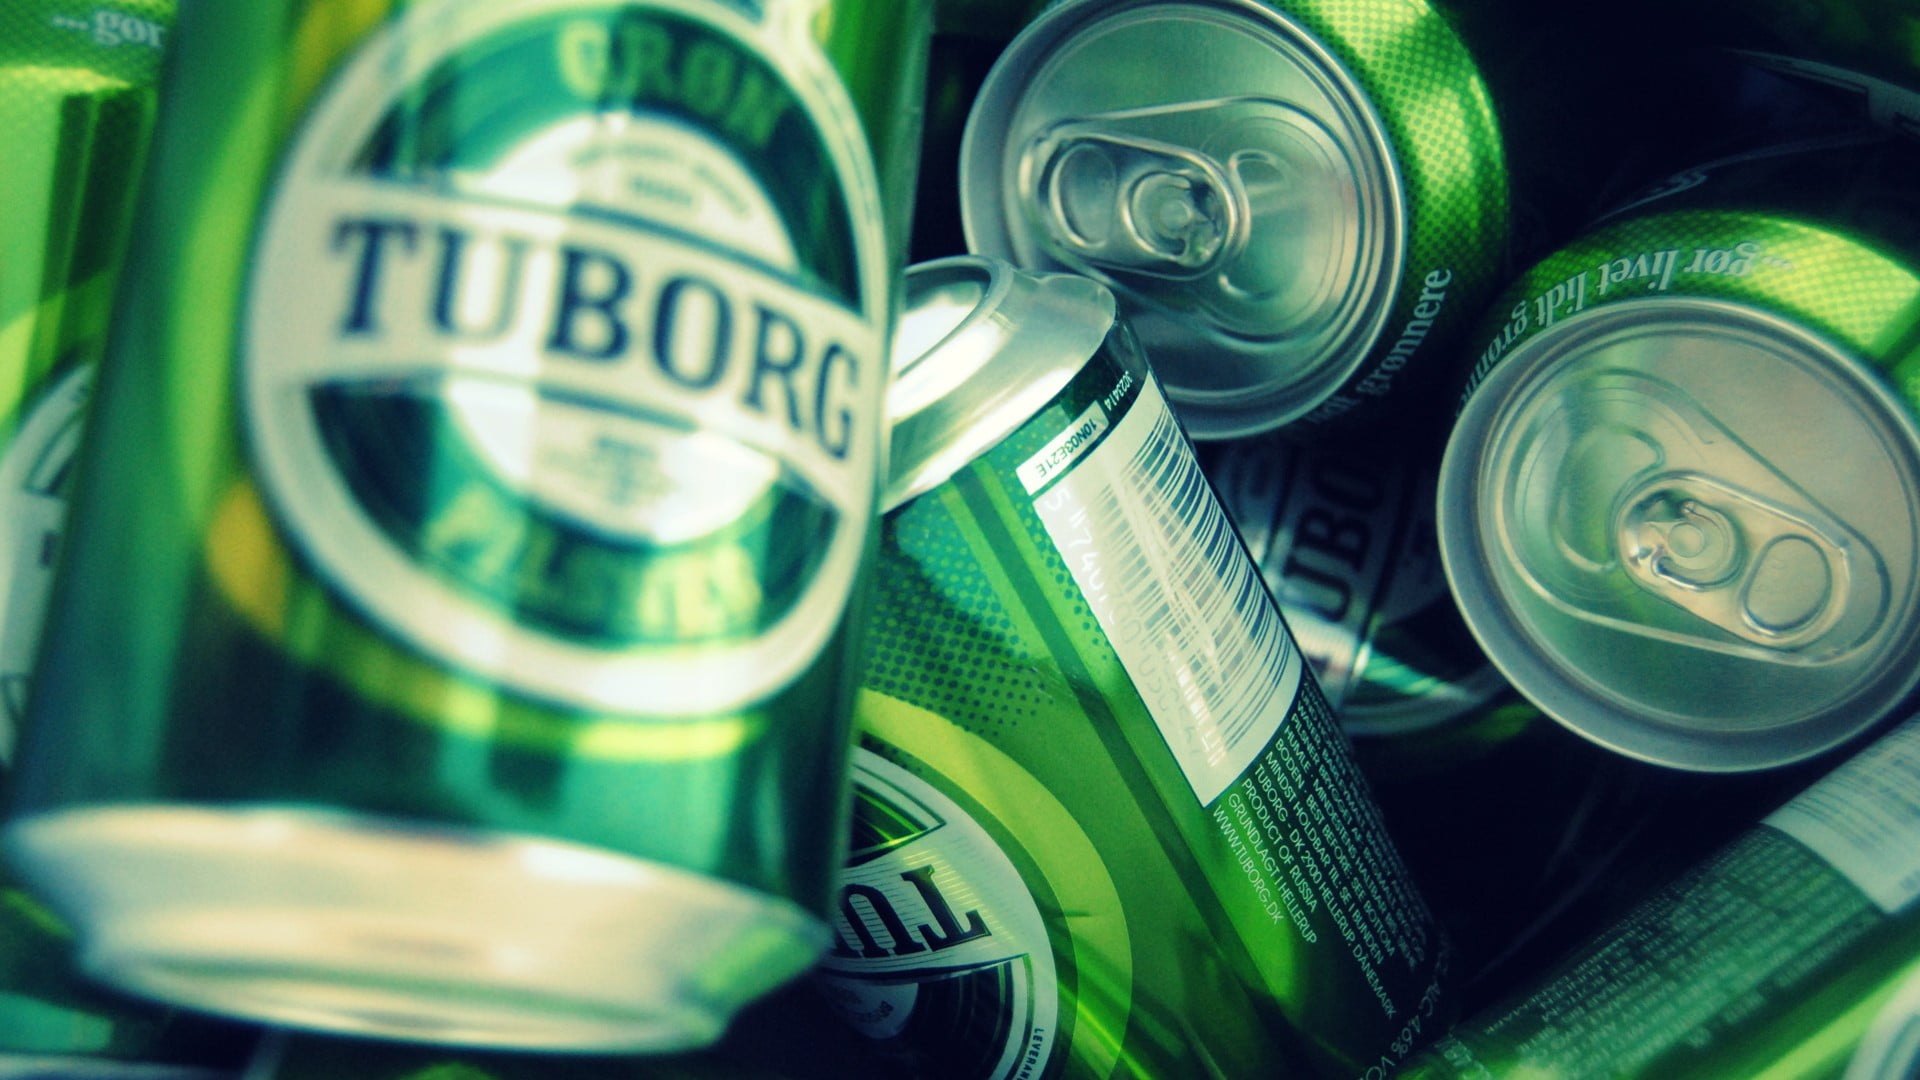 Green Tuborg Labeled Can Lot Beer Danish Alcohol HD